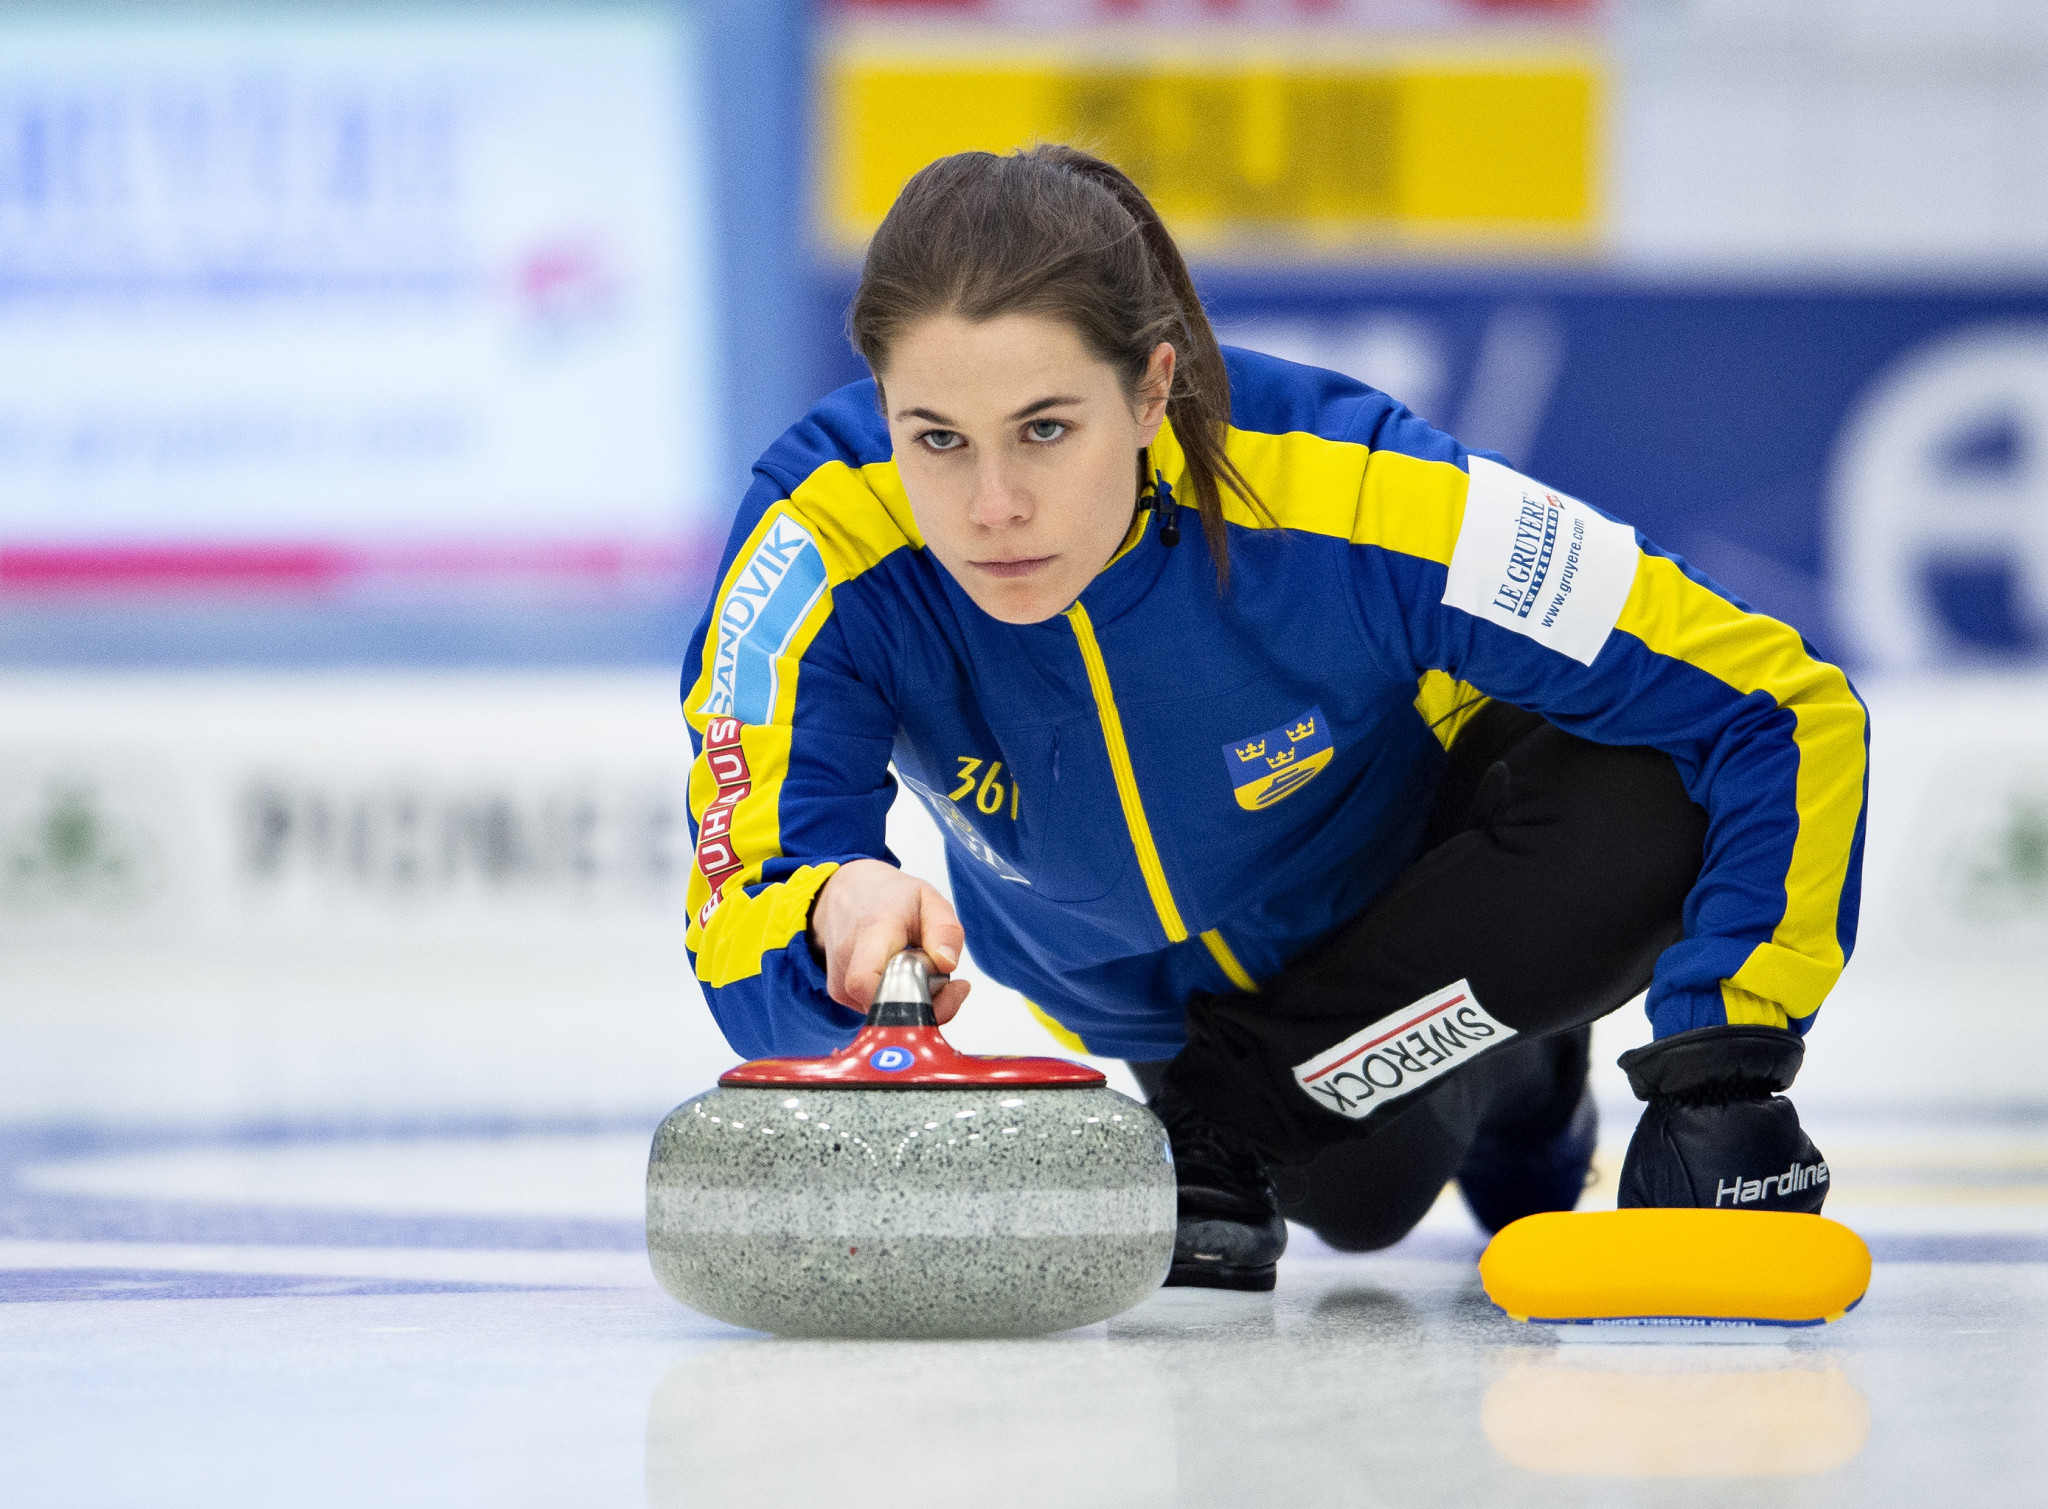 Sweden's Anna Hasselborg will be the skip for her team at the Curling World Cup grand final ©Getty Images